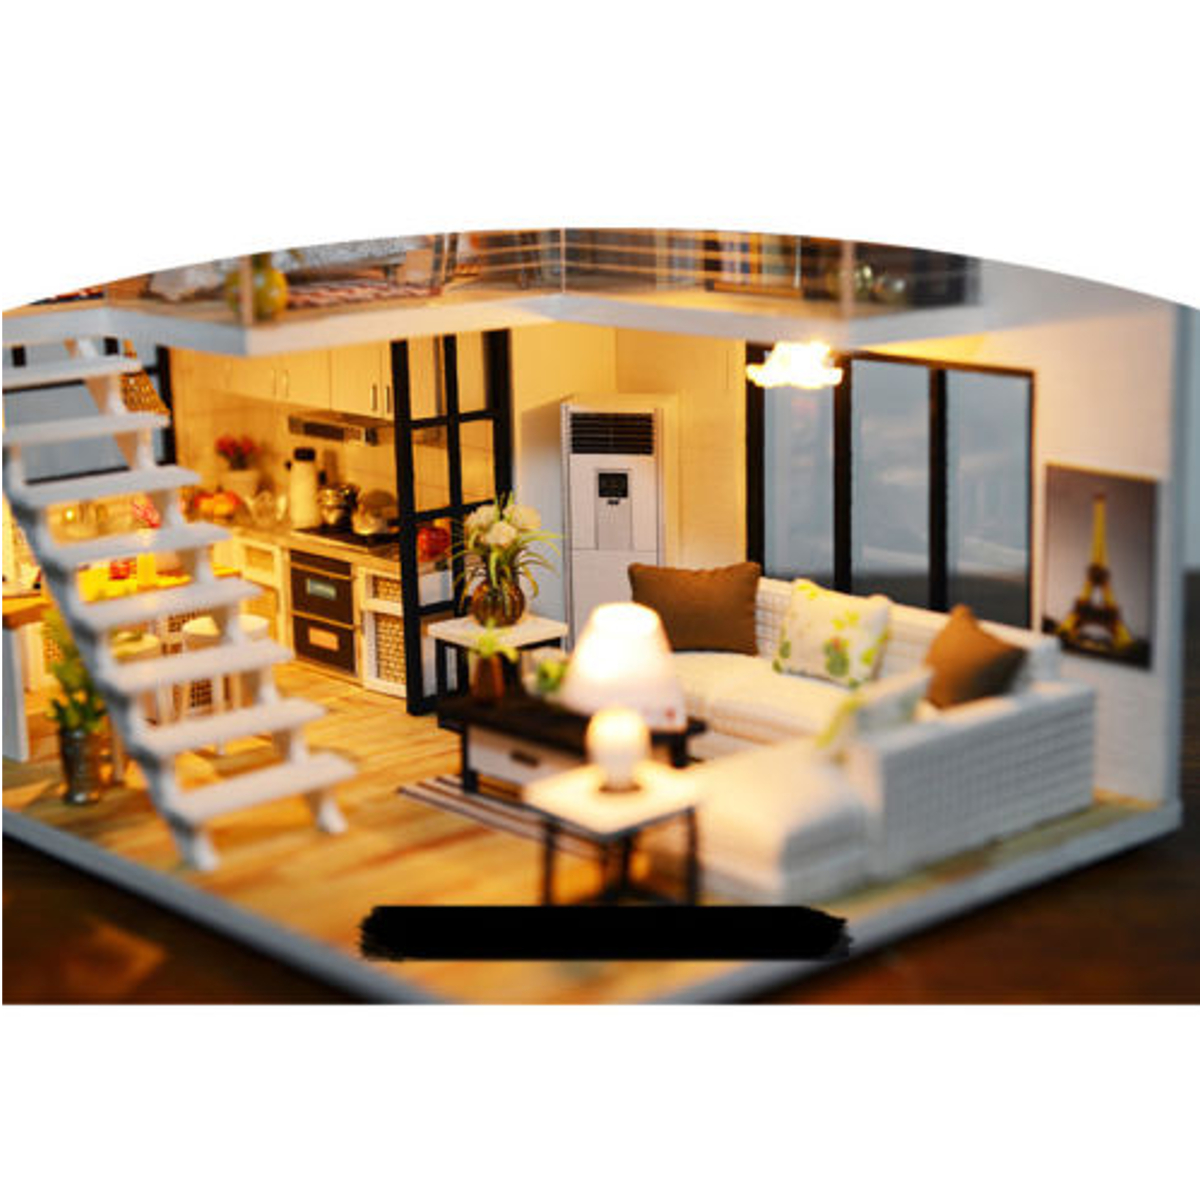 Loft-Apartments-Miniature-Dollhouse-Wooden-Doll-House-Furniture-LED-Kit-Christmas-Birthday-Gifts-1346466